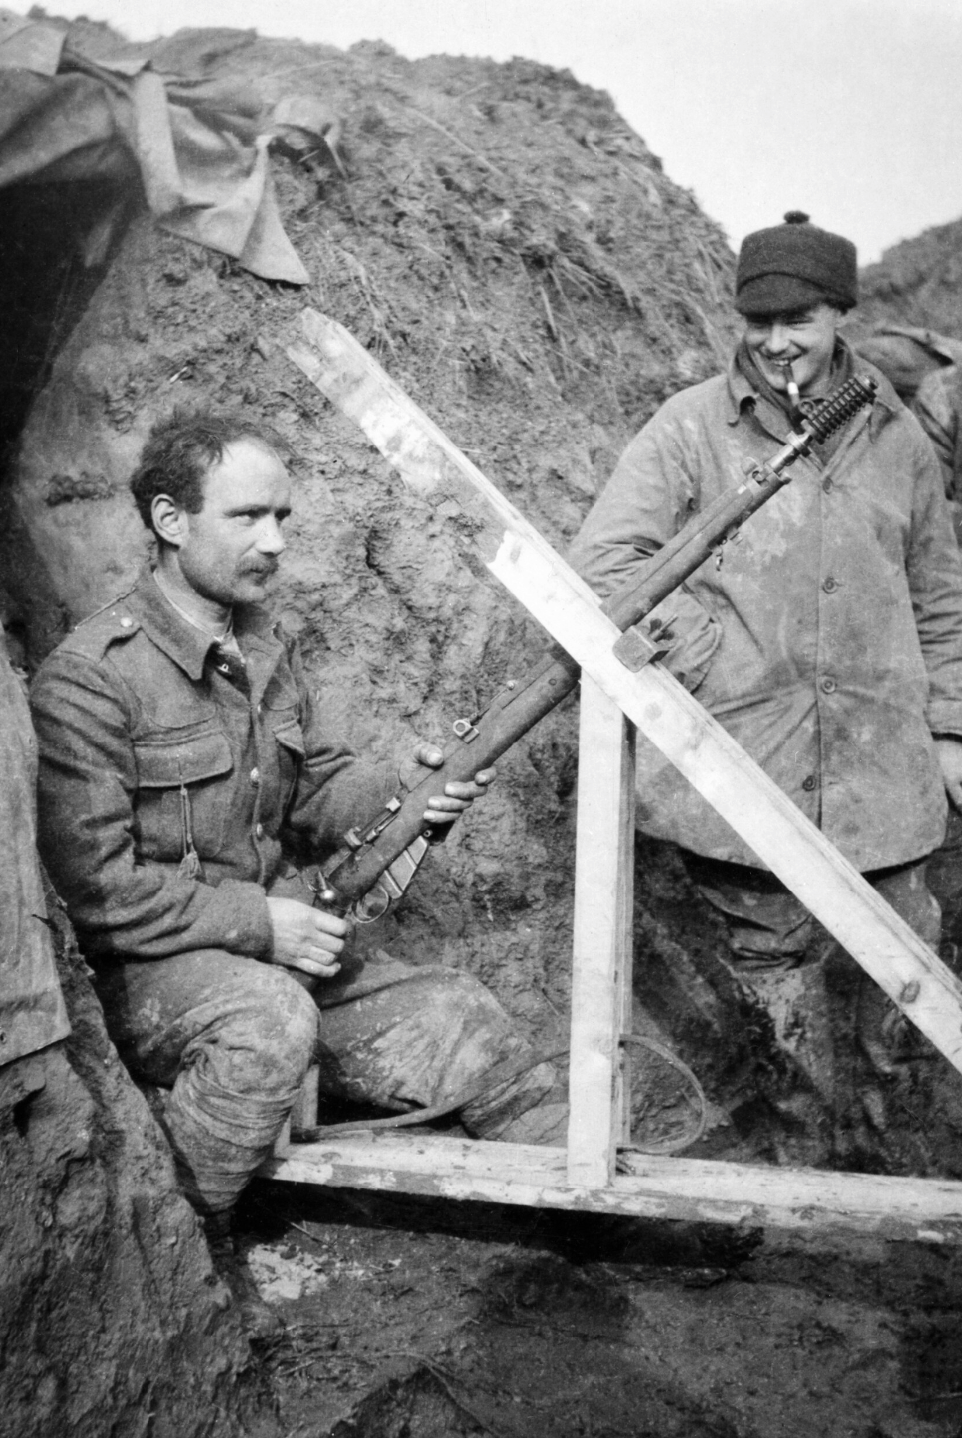 2nd Lieutenant L. J. Barley of the 1st Battalion, Cameronians (Scottish Rifles), watching as a rifle grenade is prepared for firing from trenches at Grande Flamengrie Farm on the Bois Grenier sector of the line during February 1915.